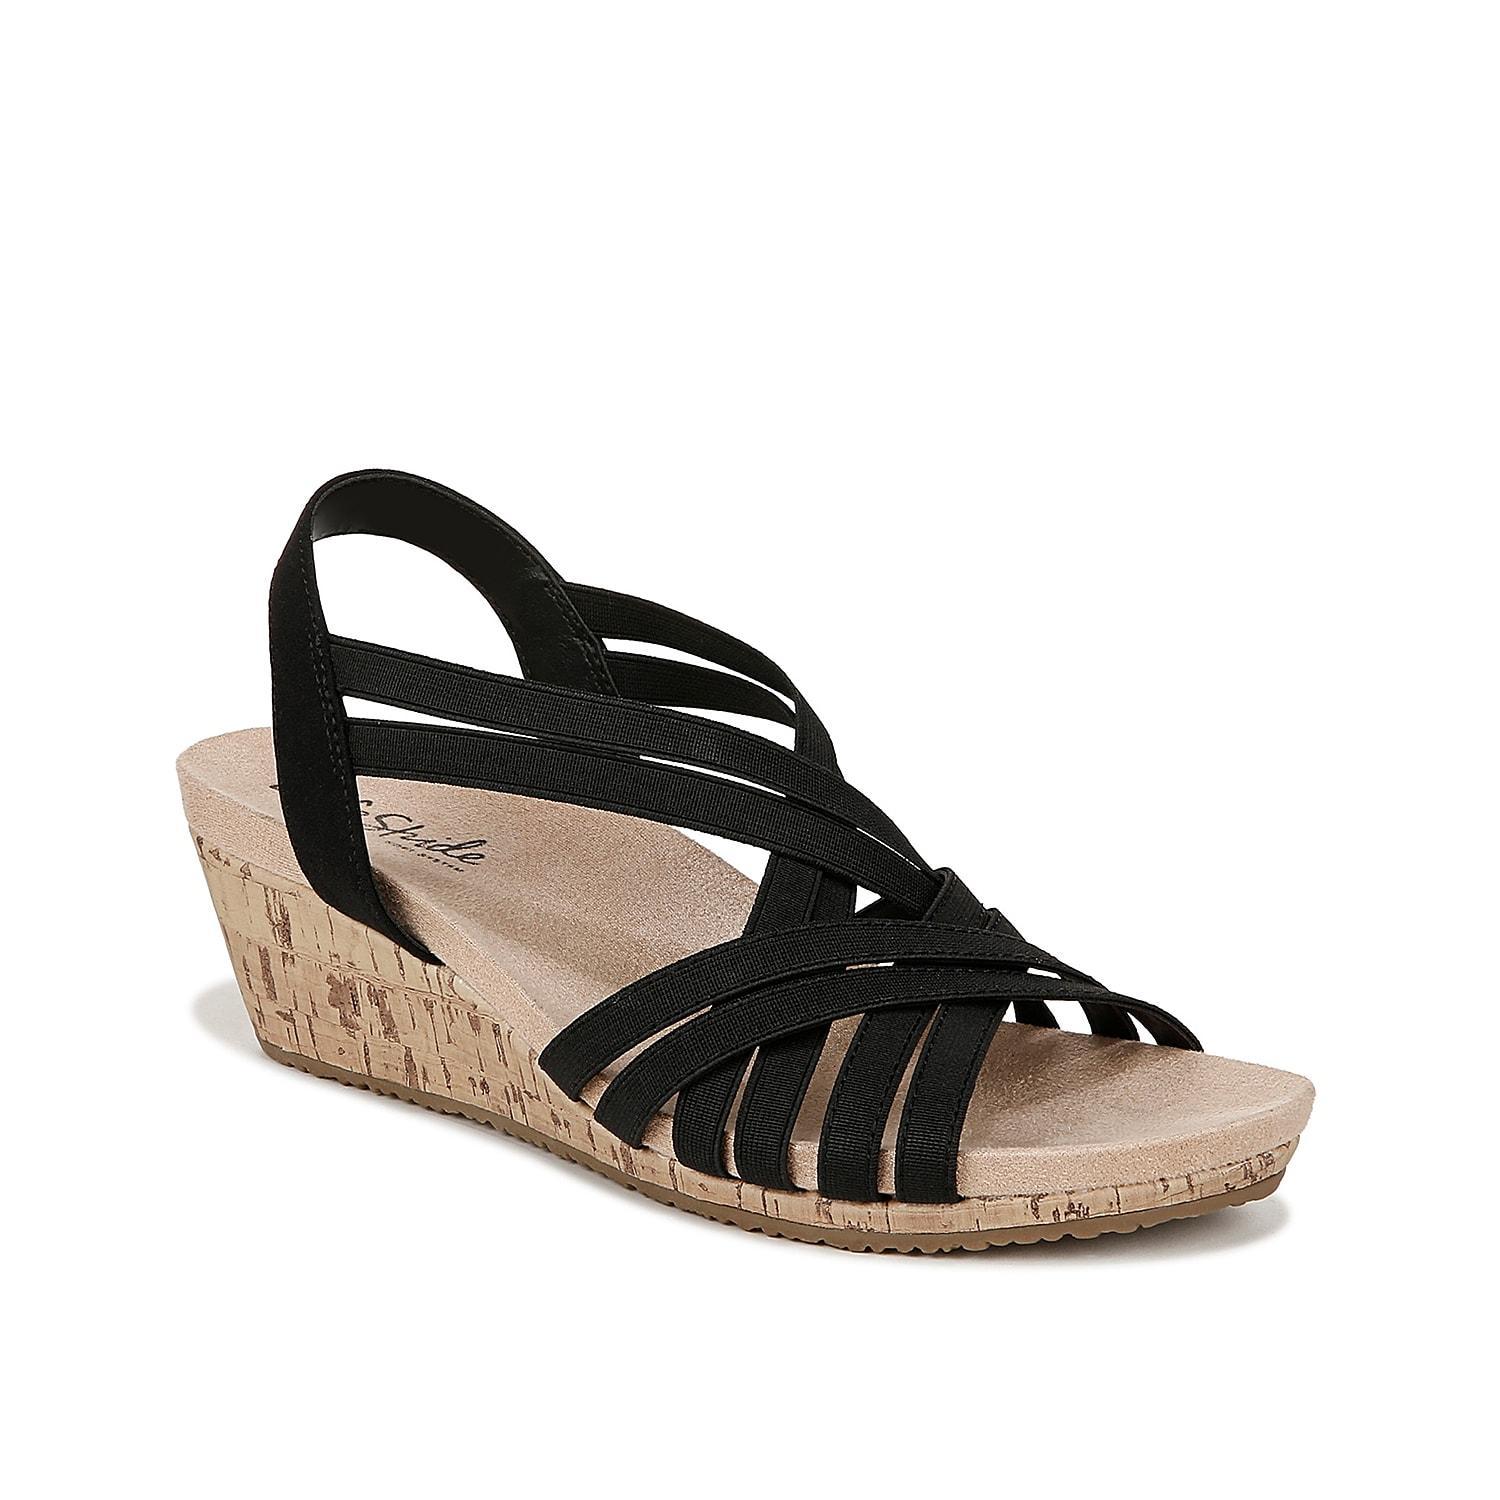 LifeStride Mallory Womens Strappy Wedges Black Product Image